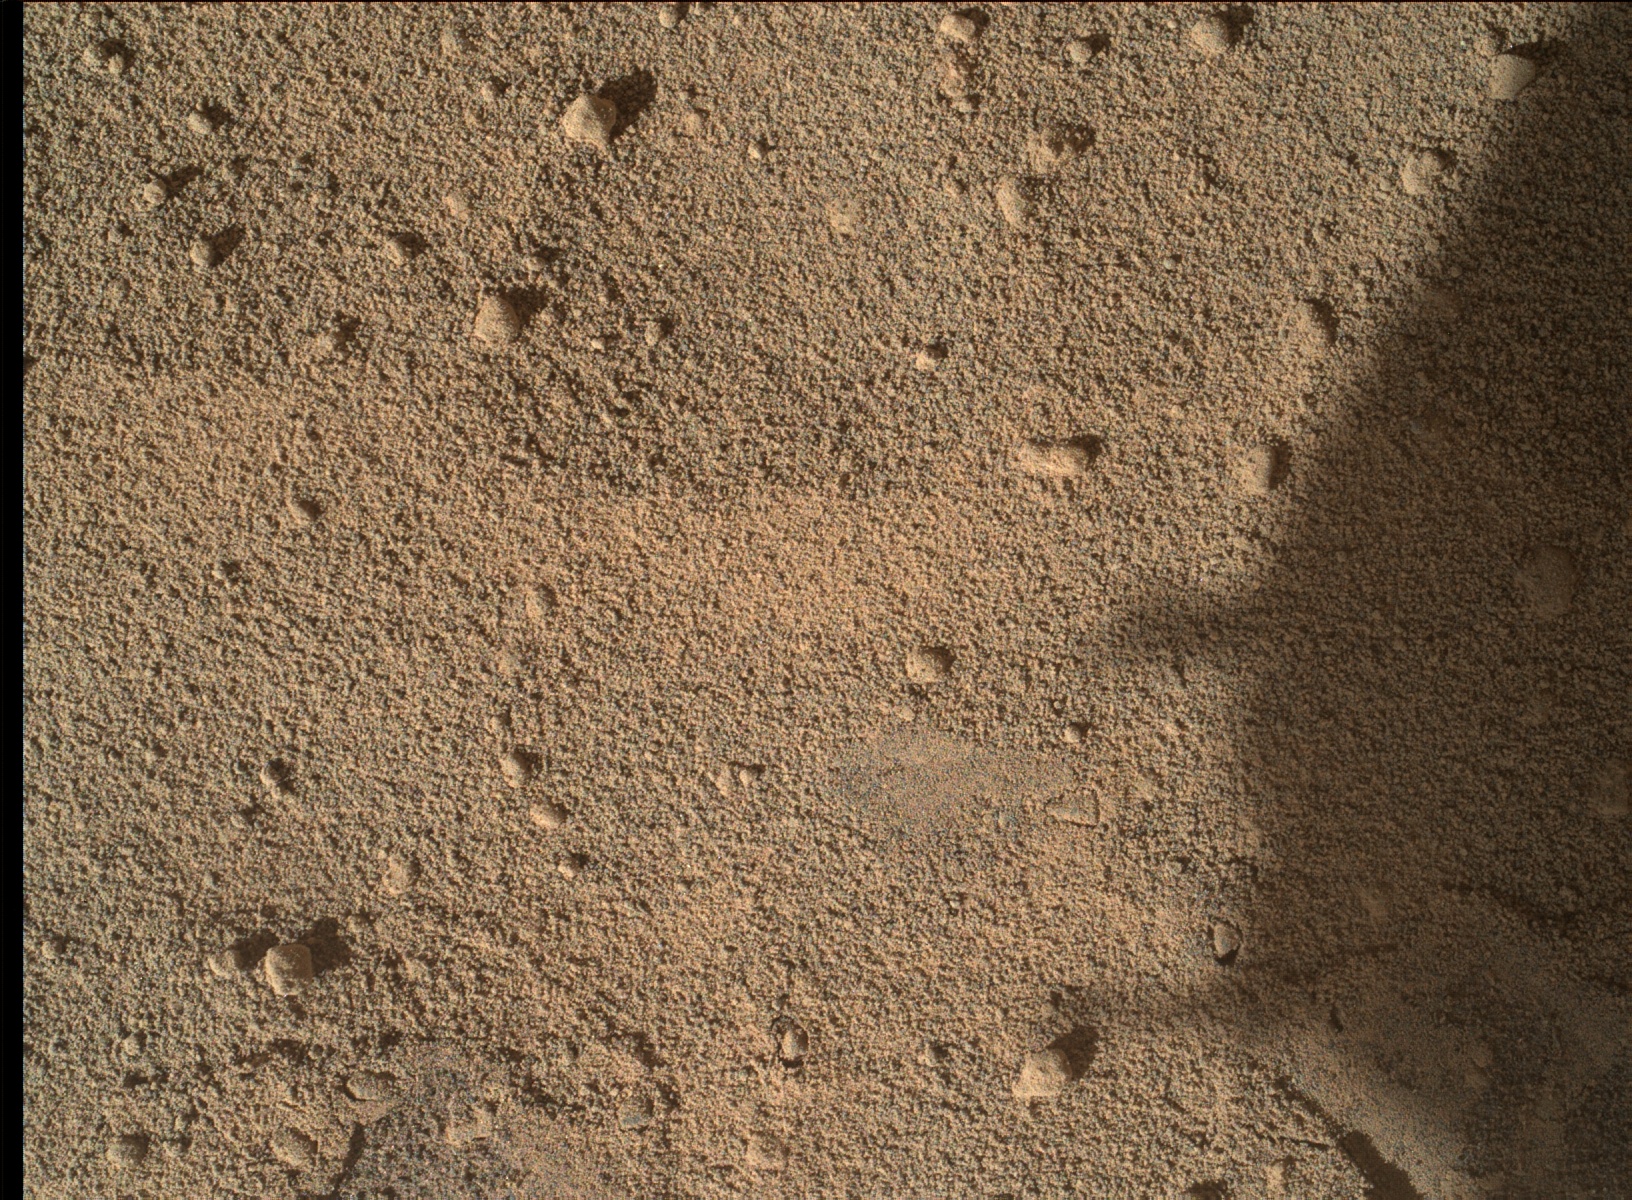 Nasa's Mars rover Curiosity acquired this image using its Mars Hand Lens Imager (MAHLI) on Sol 605